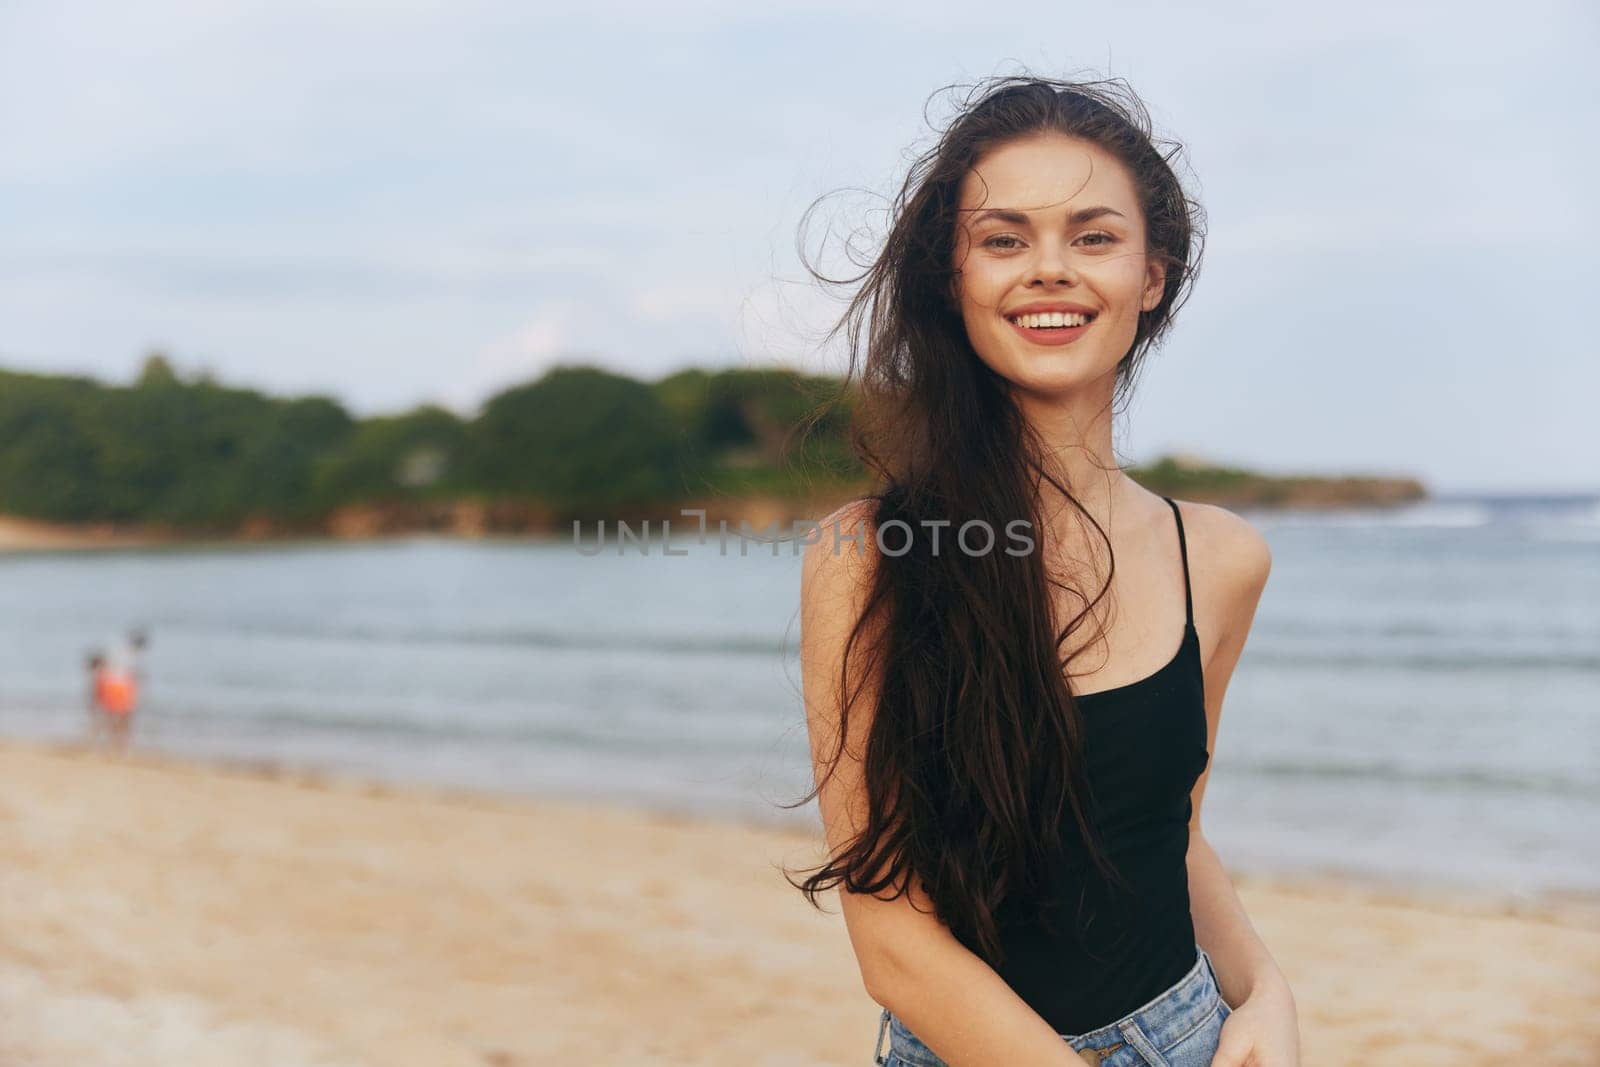 jean woman lifestyle summer sunlight smile dress enjoyment smiling relax adult girl sea ocean sunset sand beach running happy person vacation